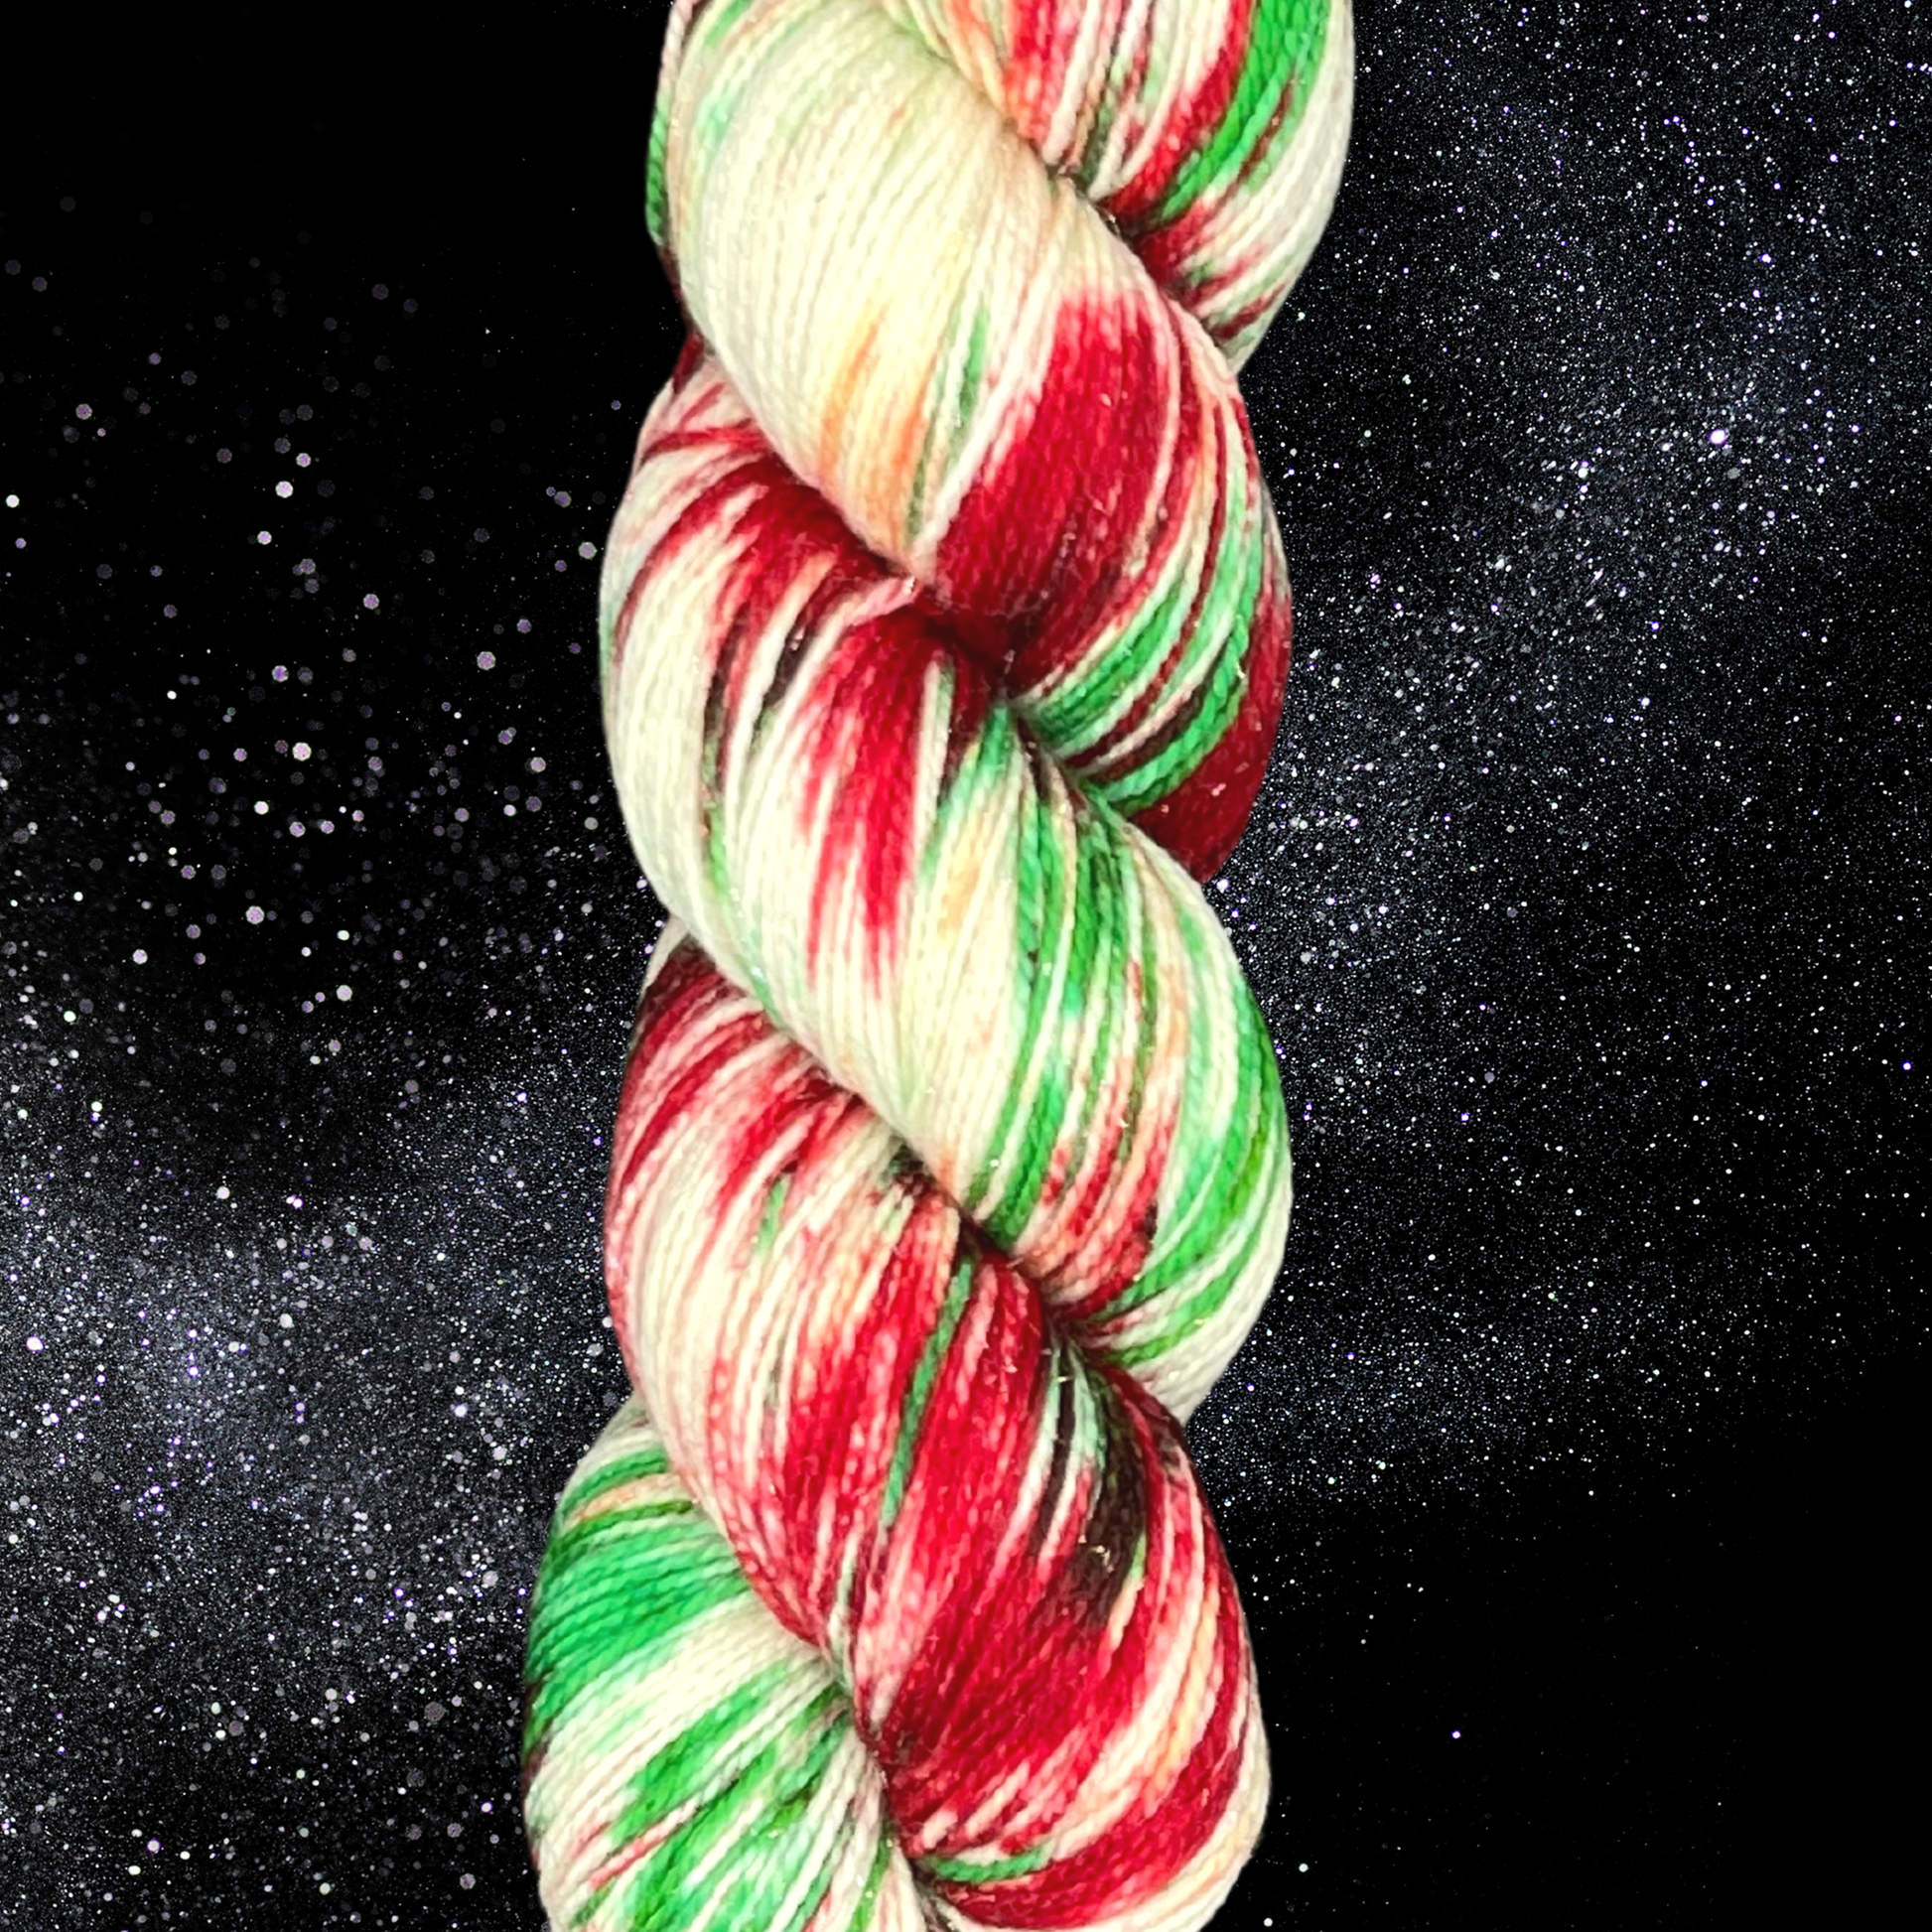 Simply Christmas - A variegated hand dyed yarn – Good Noodle Yarn Co